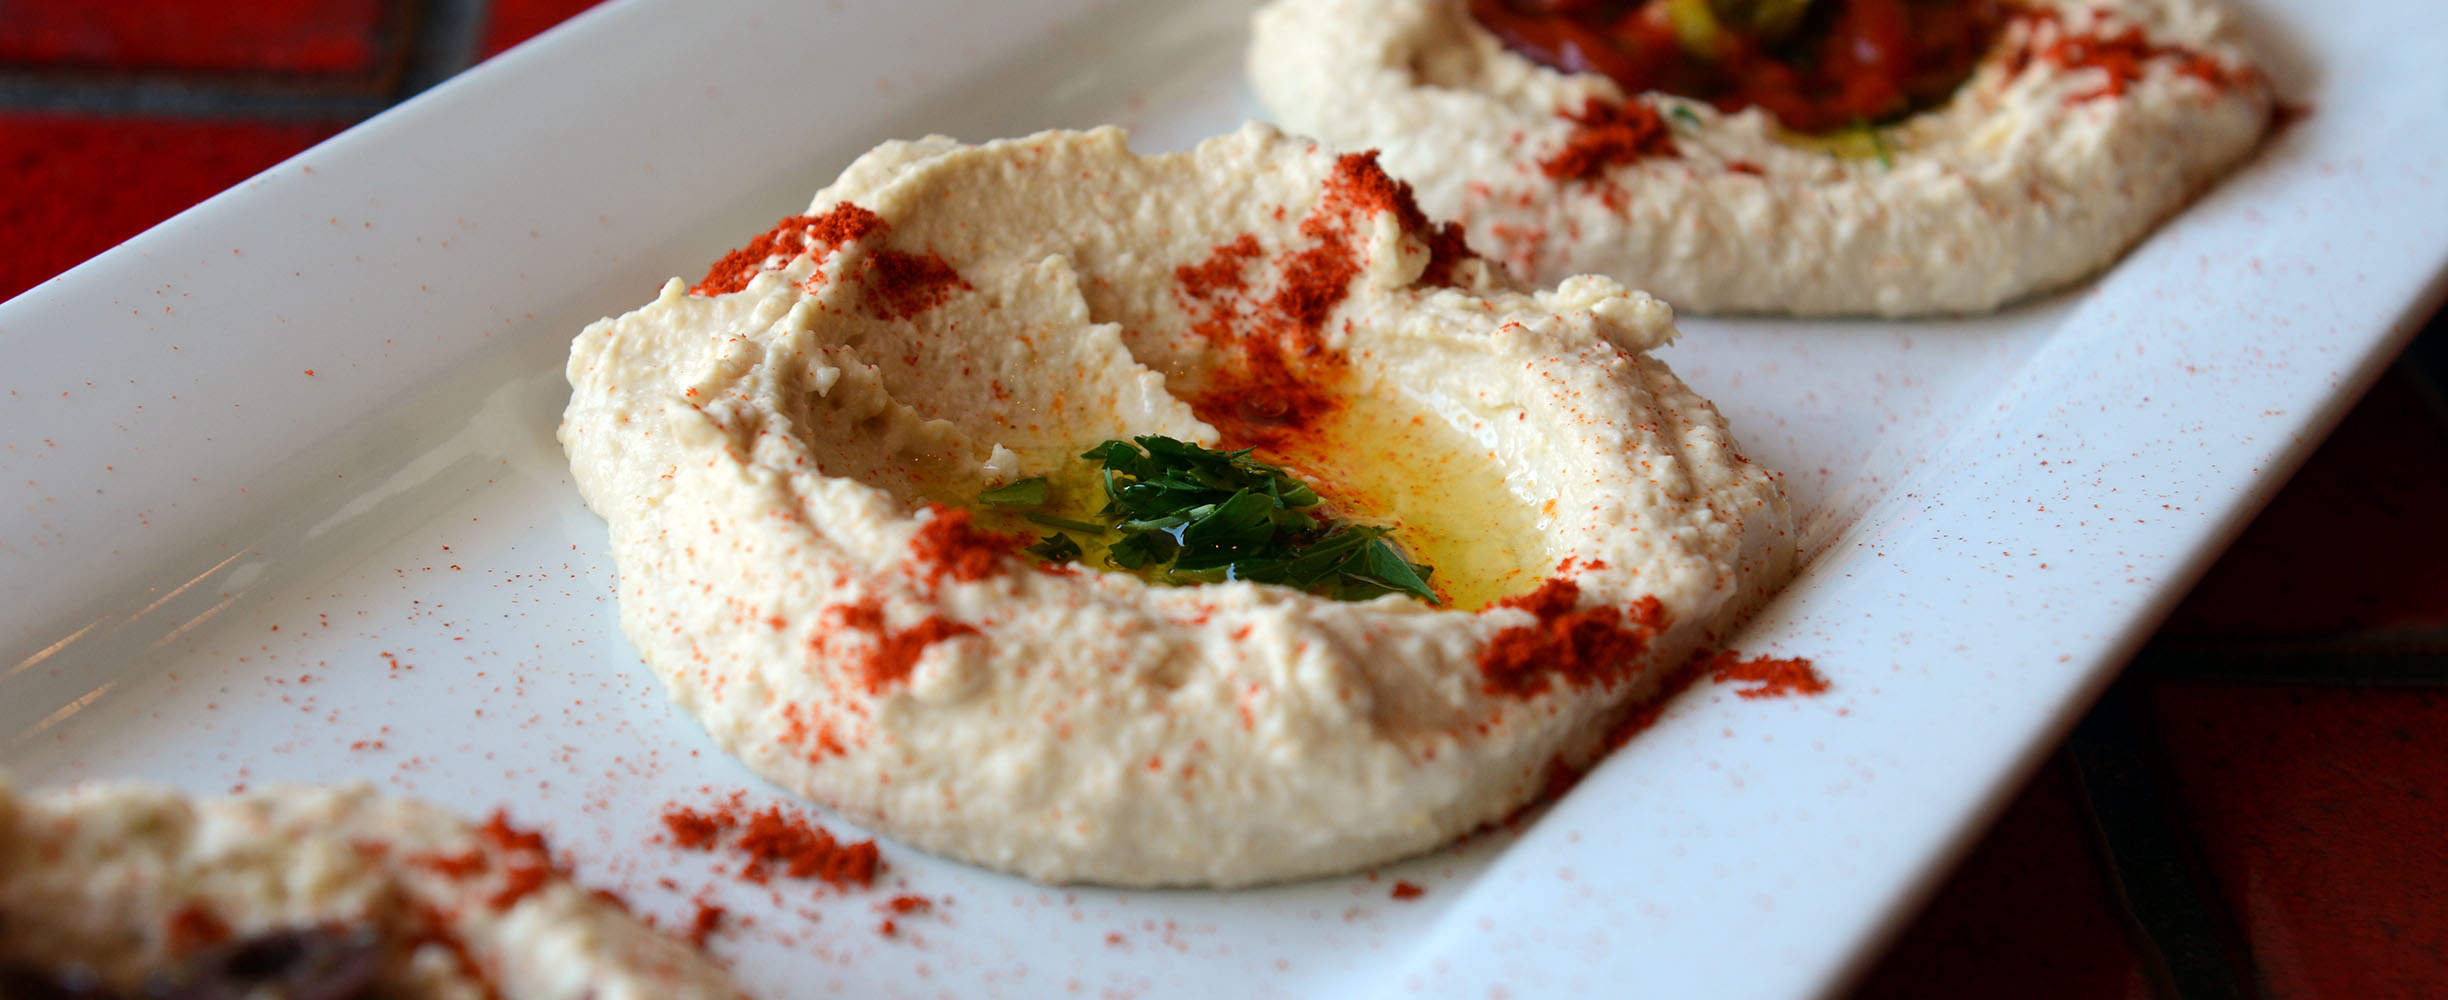 Hummus is made from scratch every day, this is fundamental for this delicious mediterranean dish.